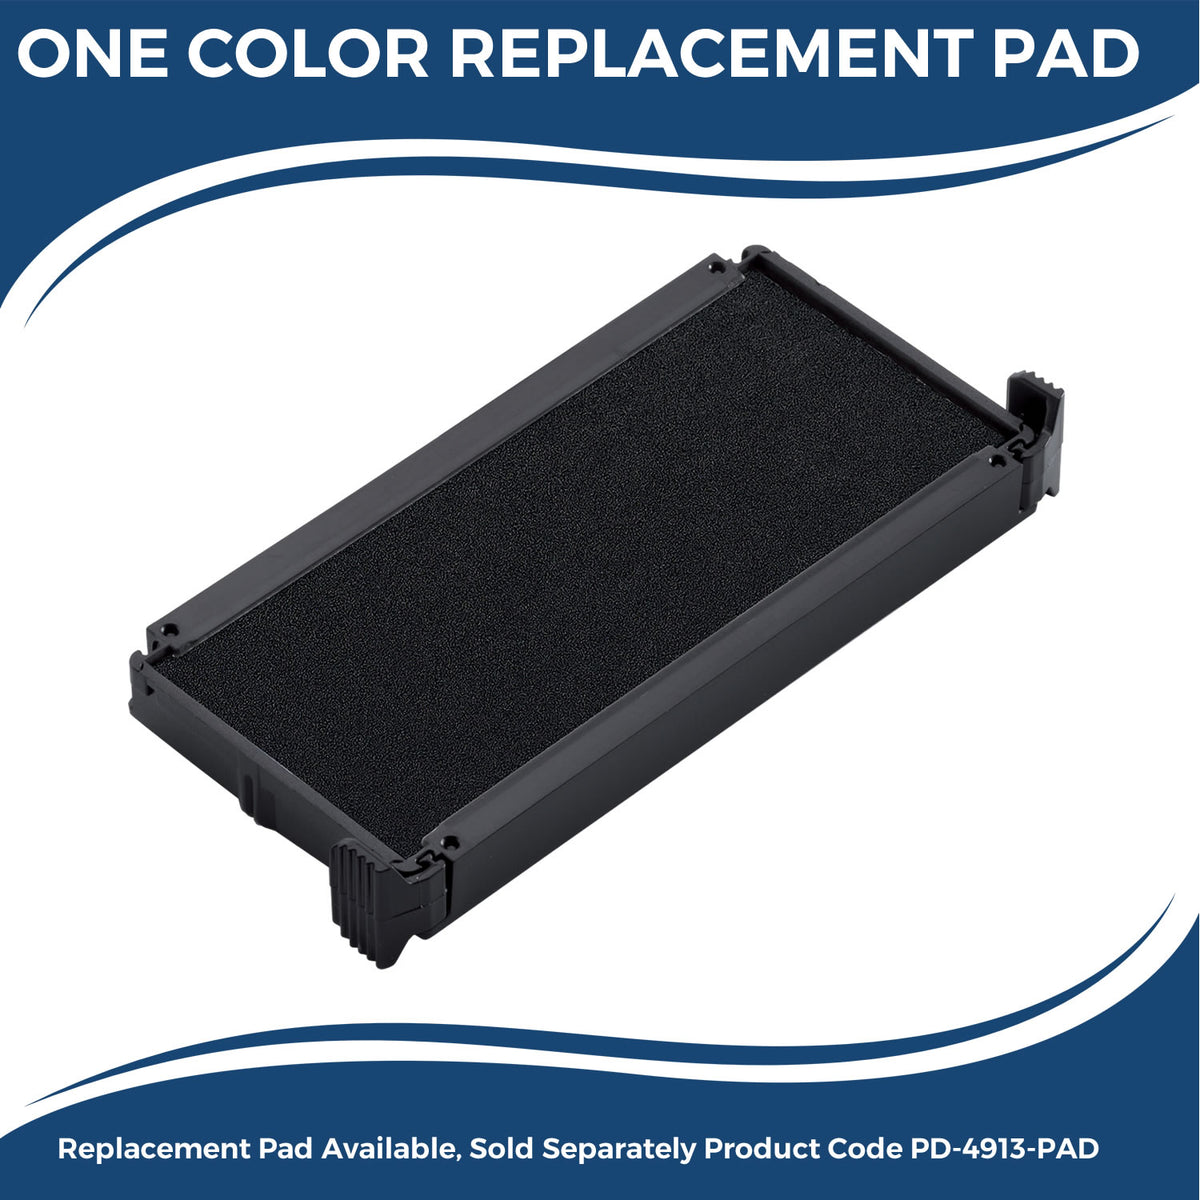 Large Self-Inking Bold X-Rays Stamp 5590S Large Replacment Pad